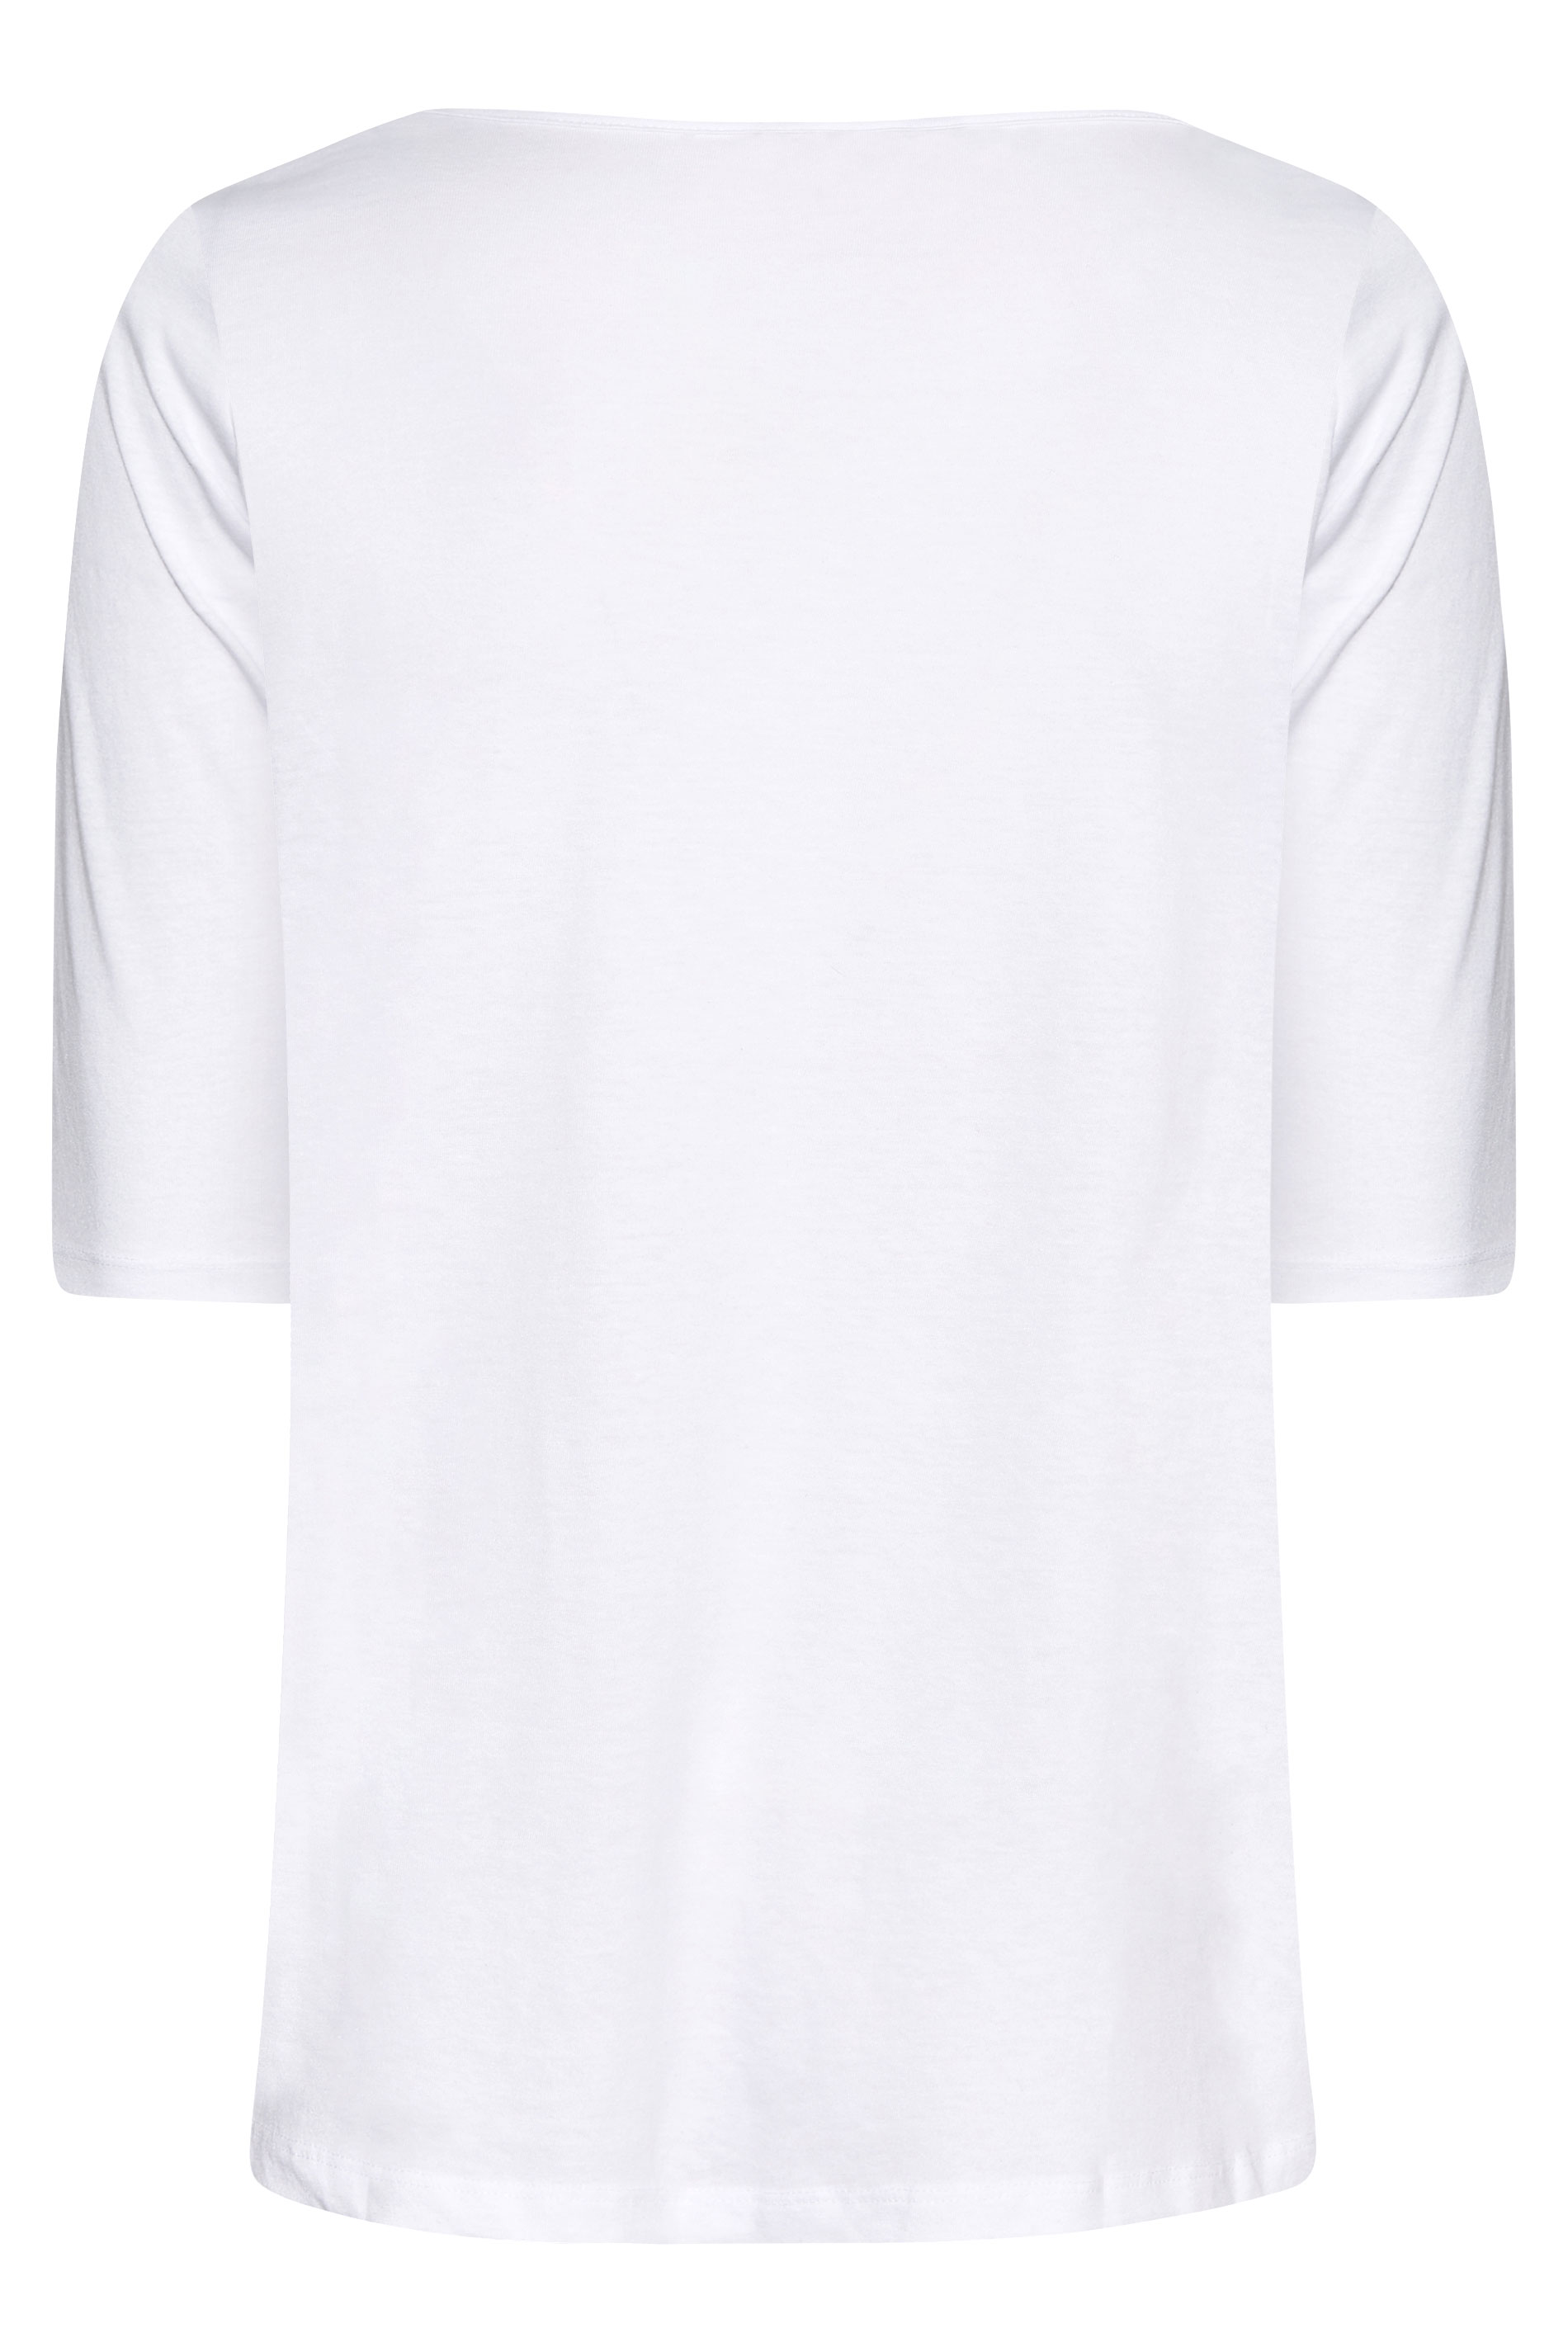 Grande taille  Tops Grande taille  T-Shirts | T-Shirt Blanc Col V Manches Longues - ZD79958